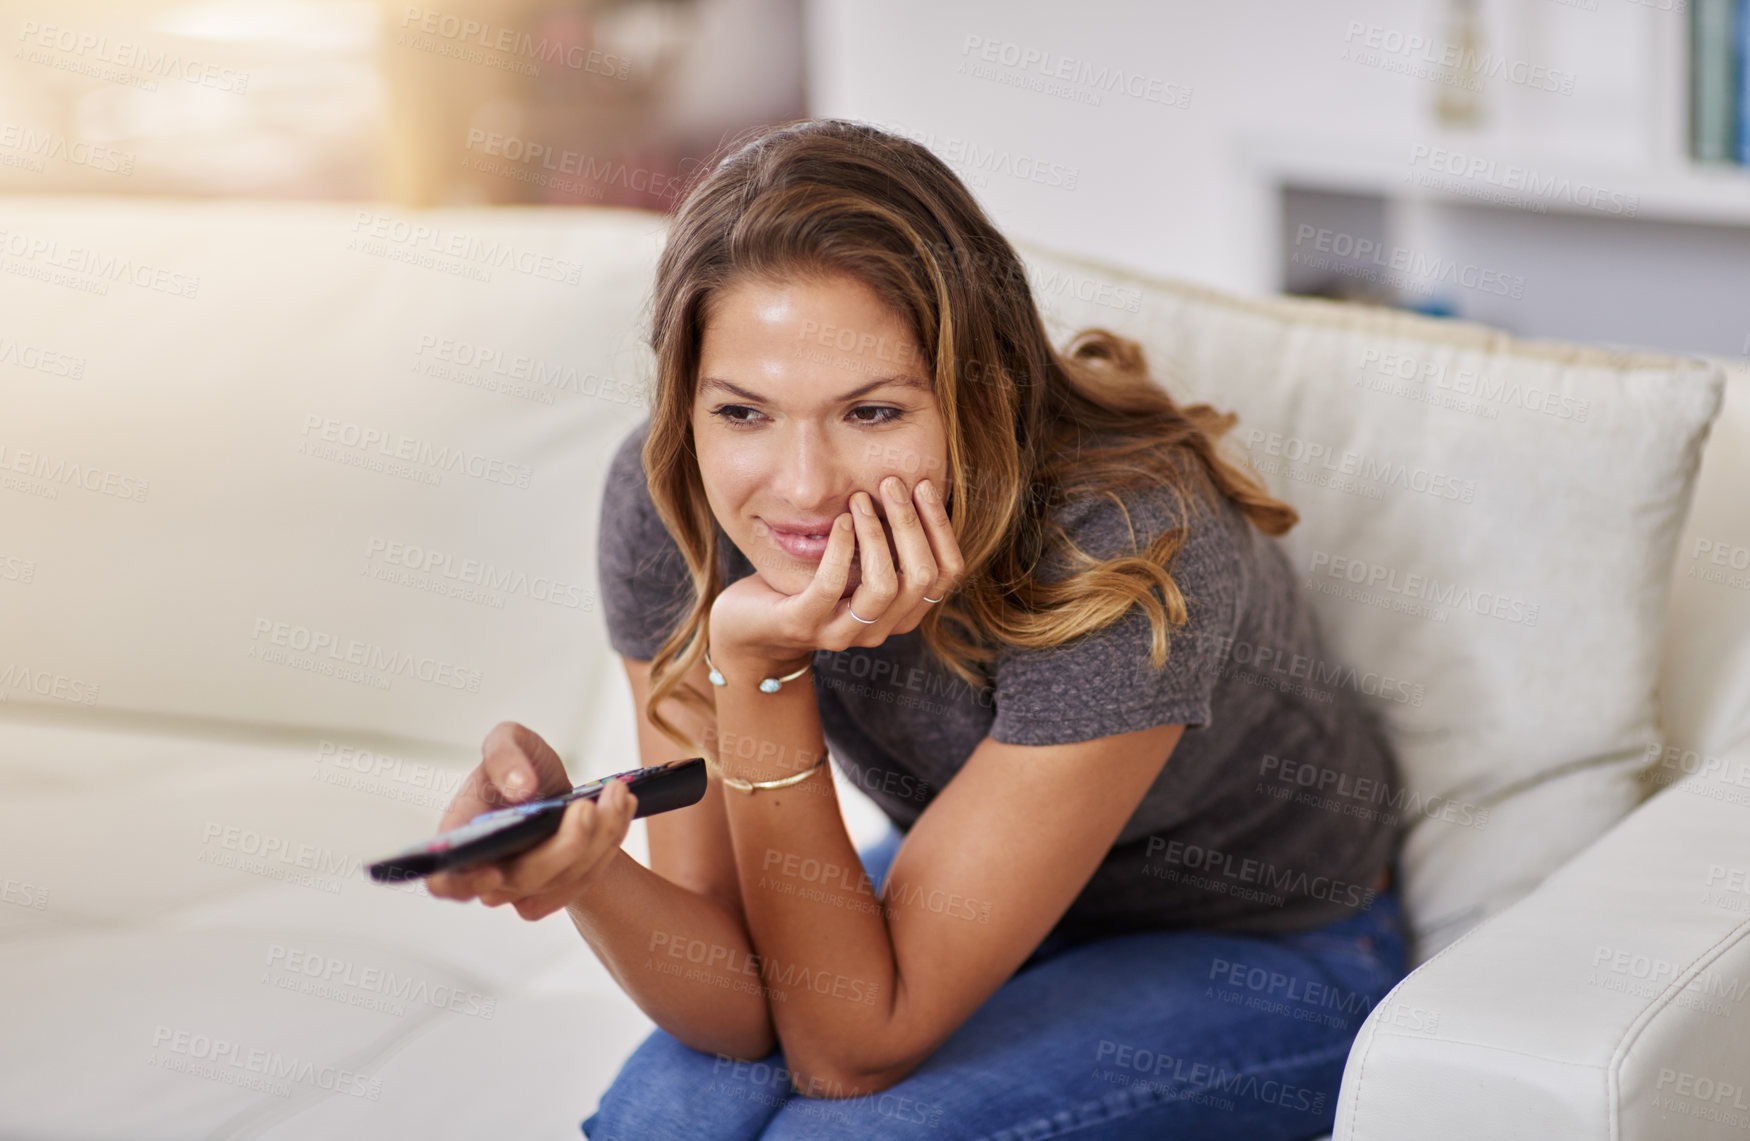 Buy stock photo Shot of a young woman spending a relaxing weekend at home watching tv